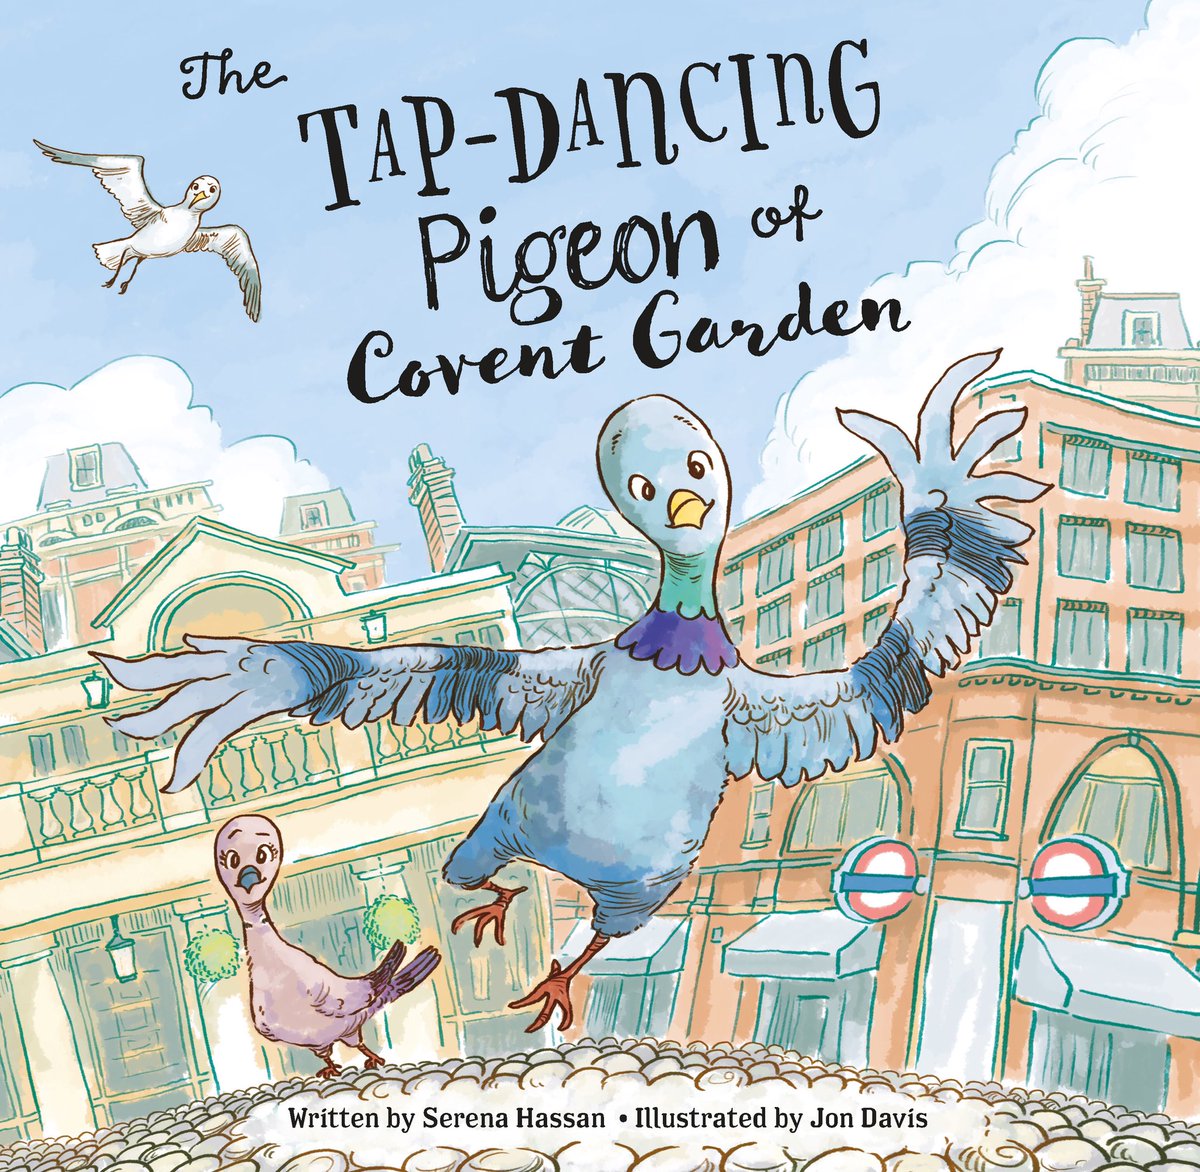 The Tap-Dancing Pigeon Of Covent Garden Sizzle reel: (Inspirational primary school workshops) youtu.be/zXvbtIAQBz4 Book trailer: youtu.be/wNsM9PXEEHk Book link amazon.com/Tap-Dancing-Pi… Fave podcast interview: youtu.be/jTiSl4IUwPU Book me: serenahassan@icloud.com